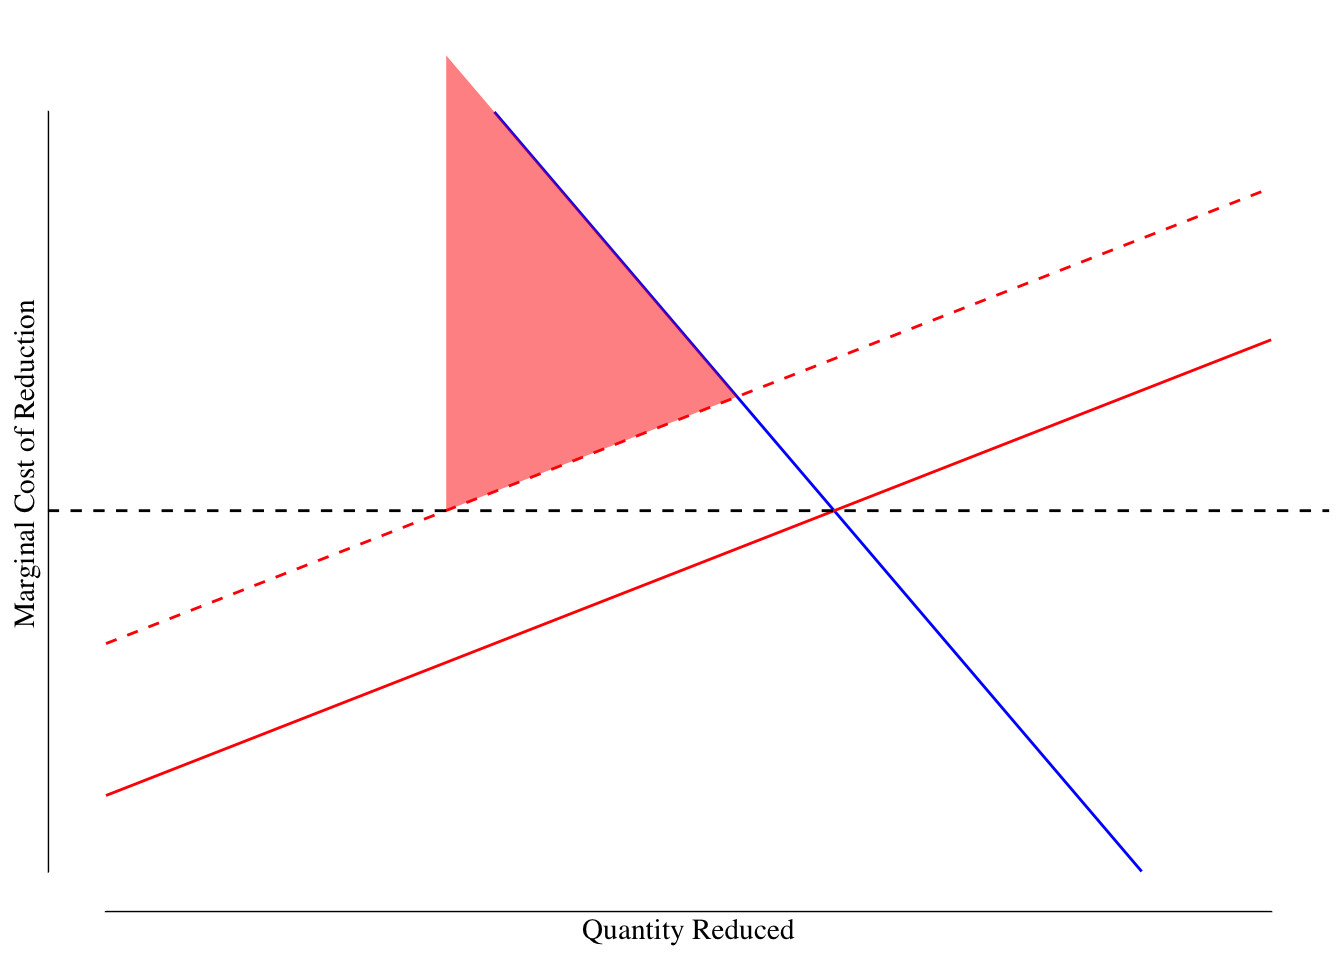 Market for Reductions in Lead in Drinking Water: Corrective Tax. The solid blue line denotes the SMB or marginal damage of lead. The red solid line is our best guess for the marginal cost of removing lead while the dashed red line is the actual marginal cost. The dashed black line is the tax. The red shaded area is the deadweight loss.